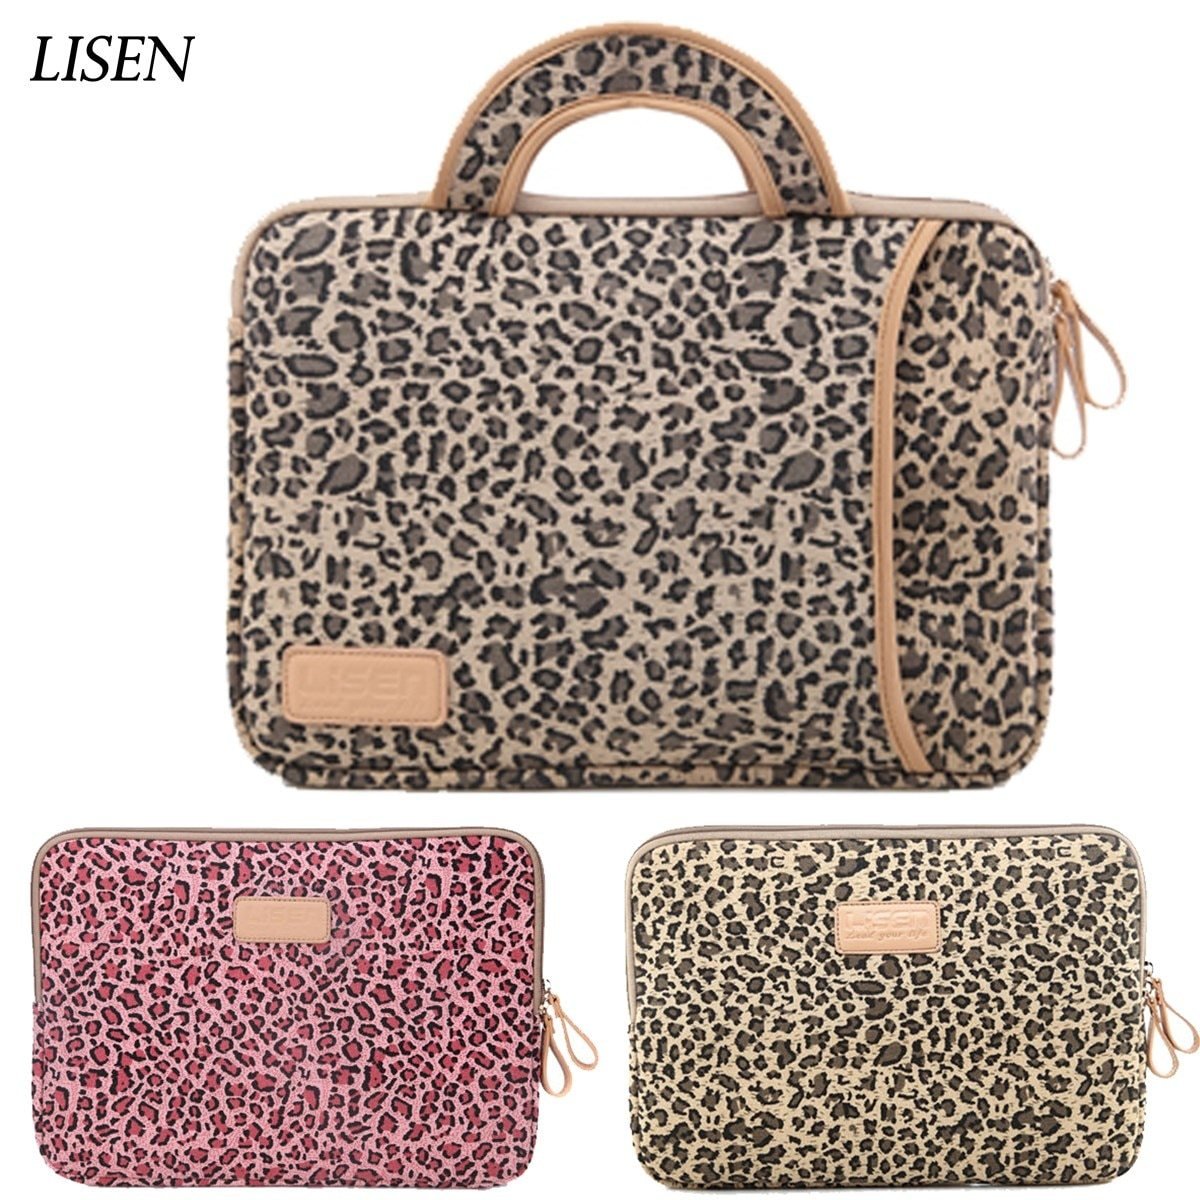 13shockproof leopard pouch handbag Liner Sleeve Case for Macbook air 13 14 15 15.4 Cover for Retina Pro 13.3